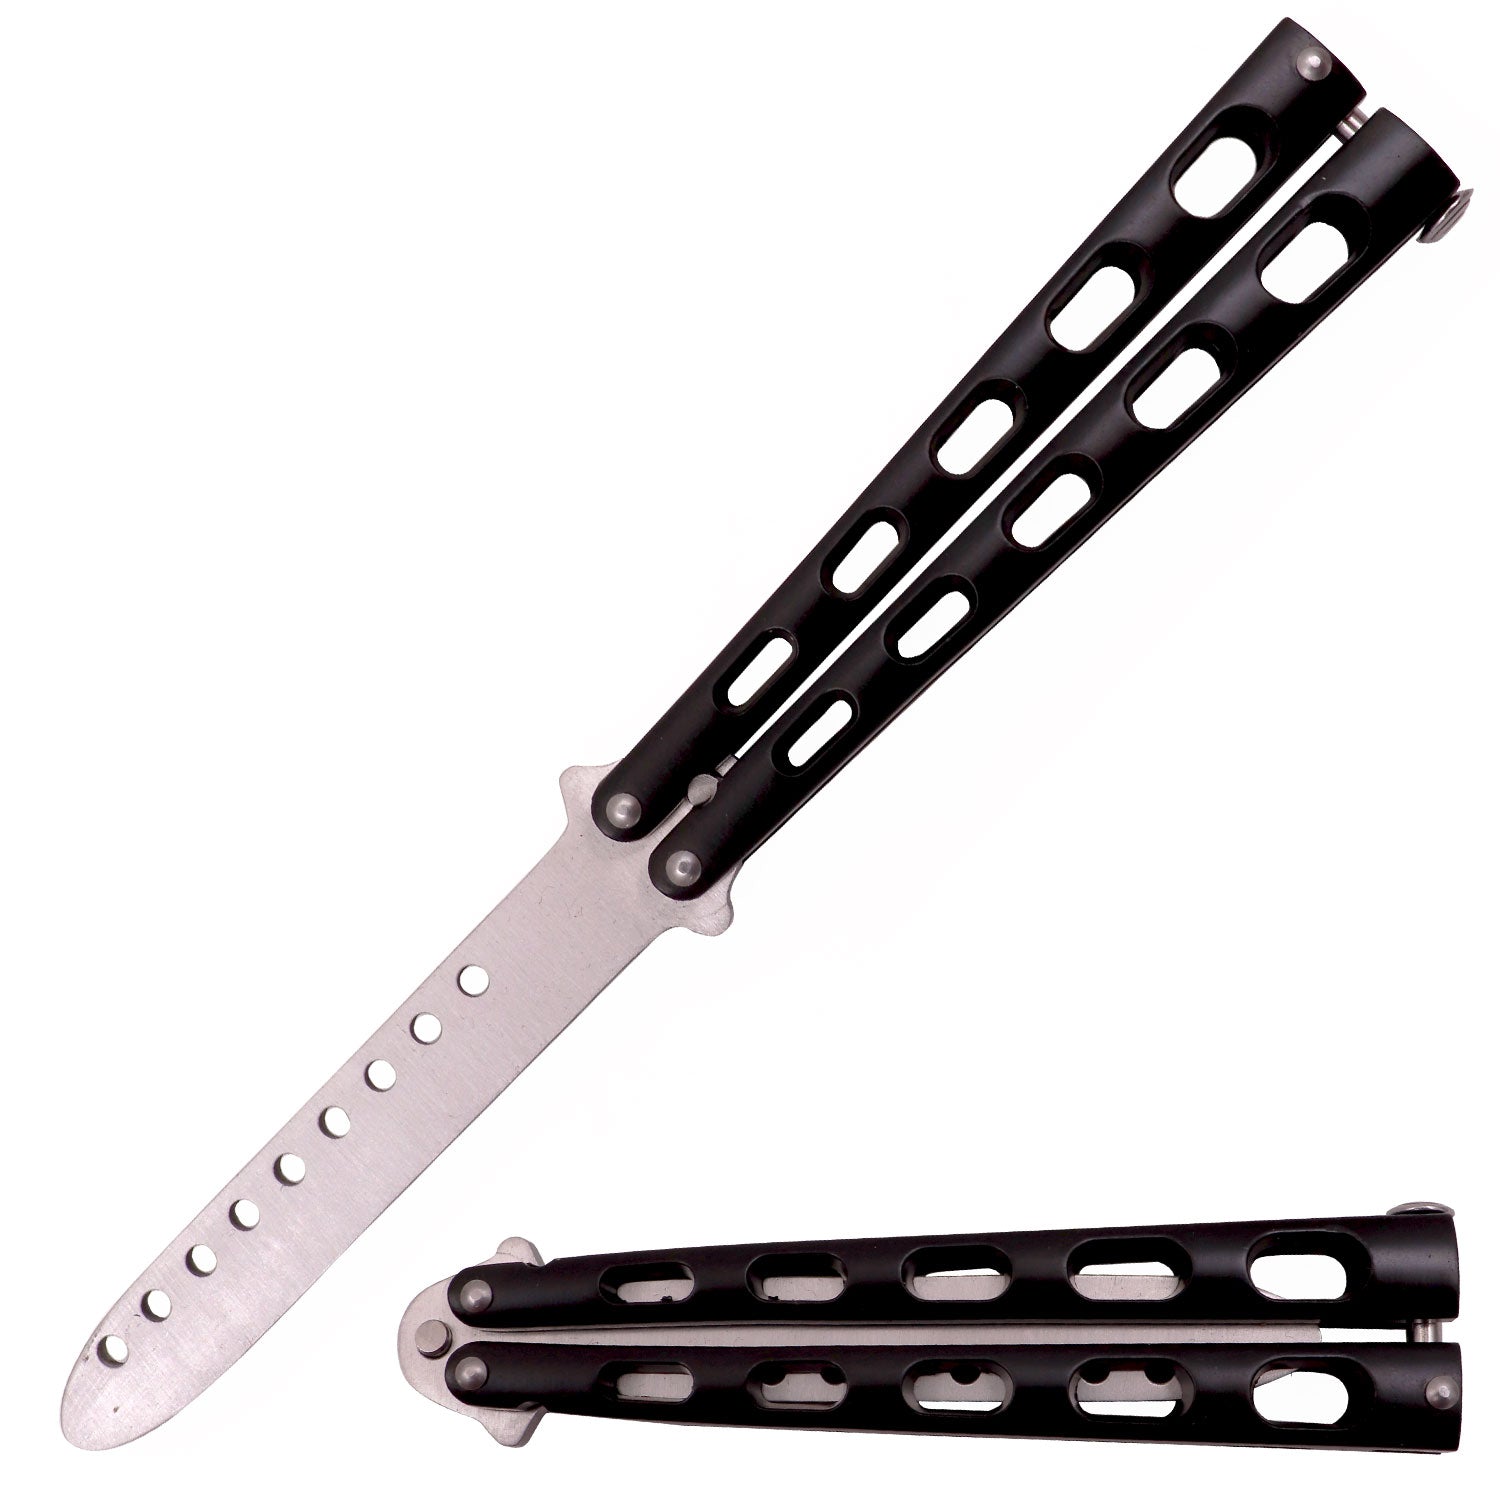 Tiger-USA Butterfly Training Knife 440 Stainless 8.85 Inch - Black sil ...